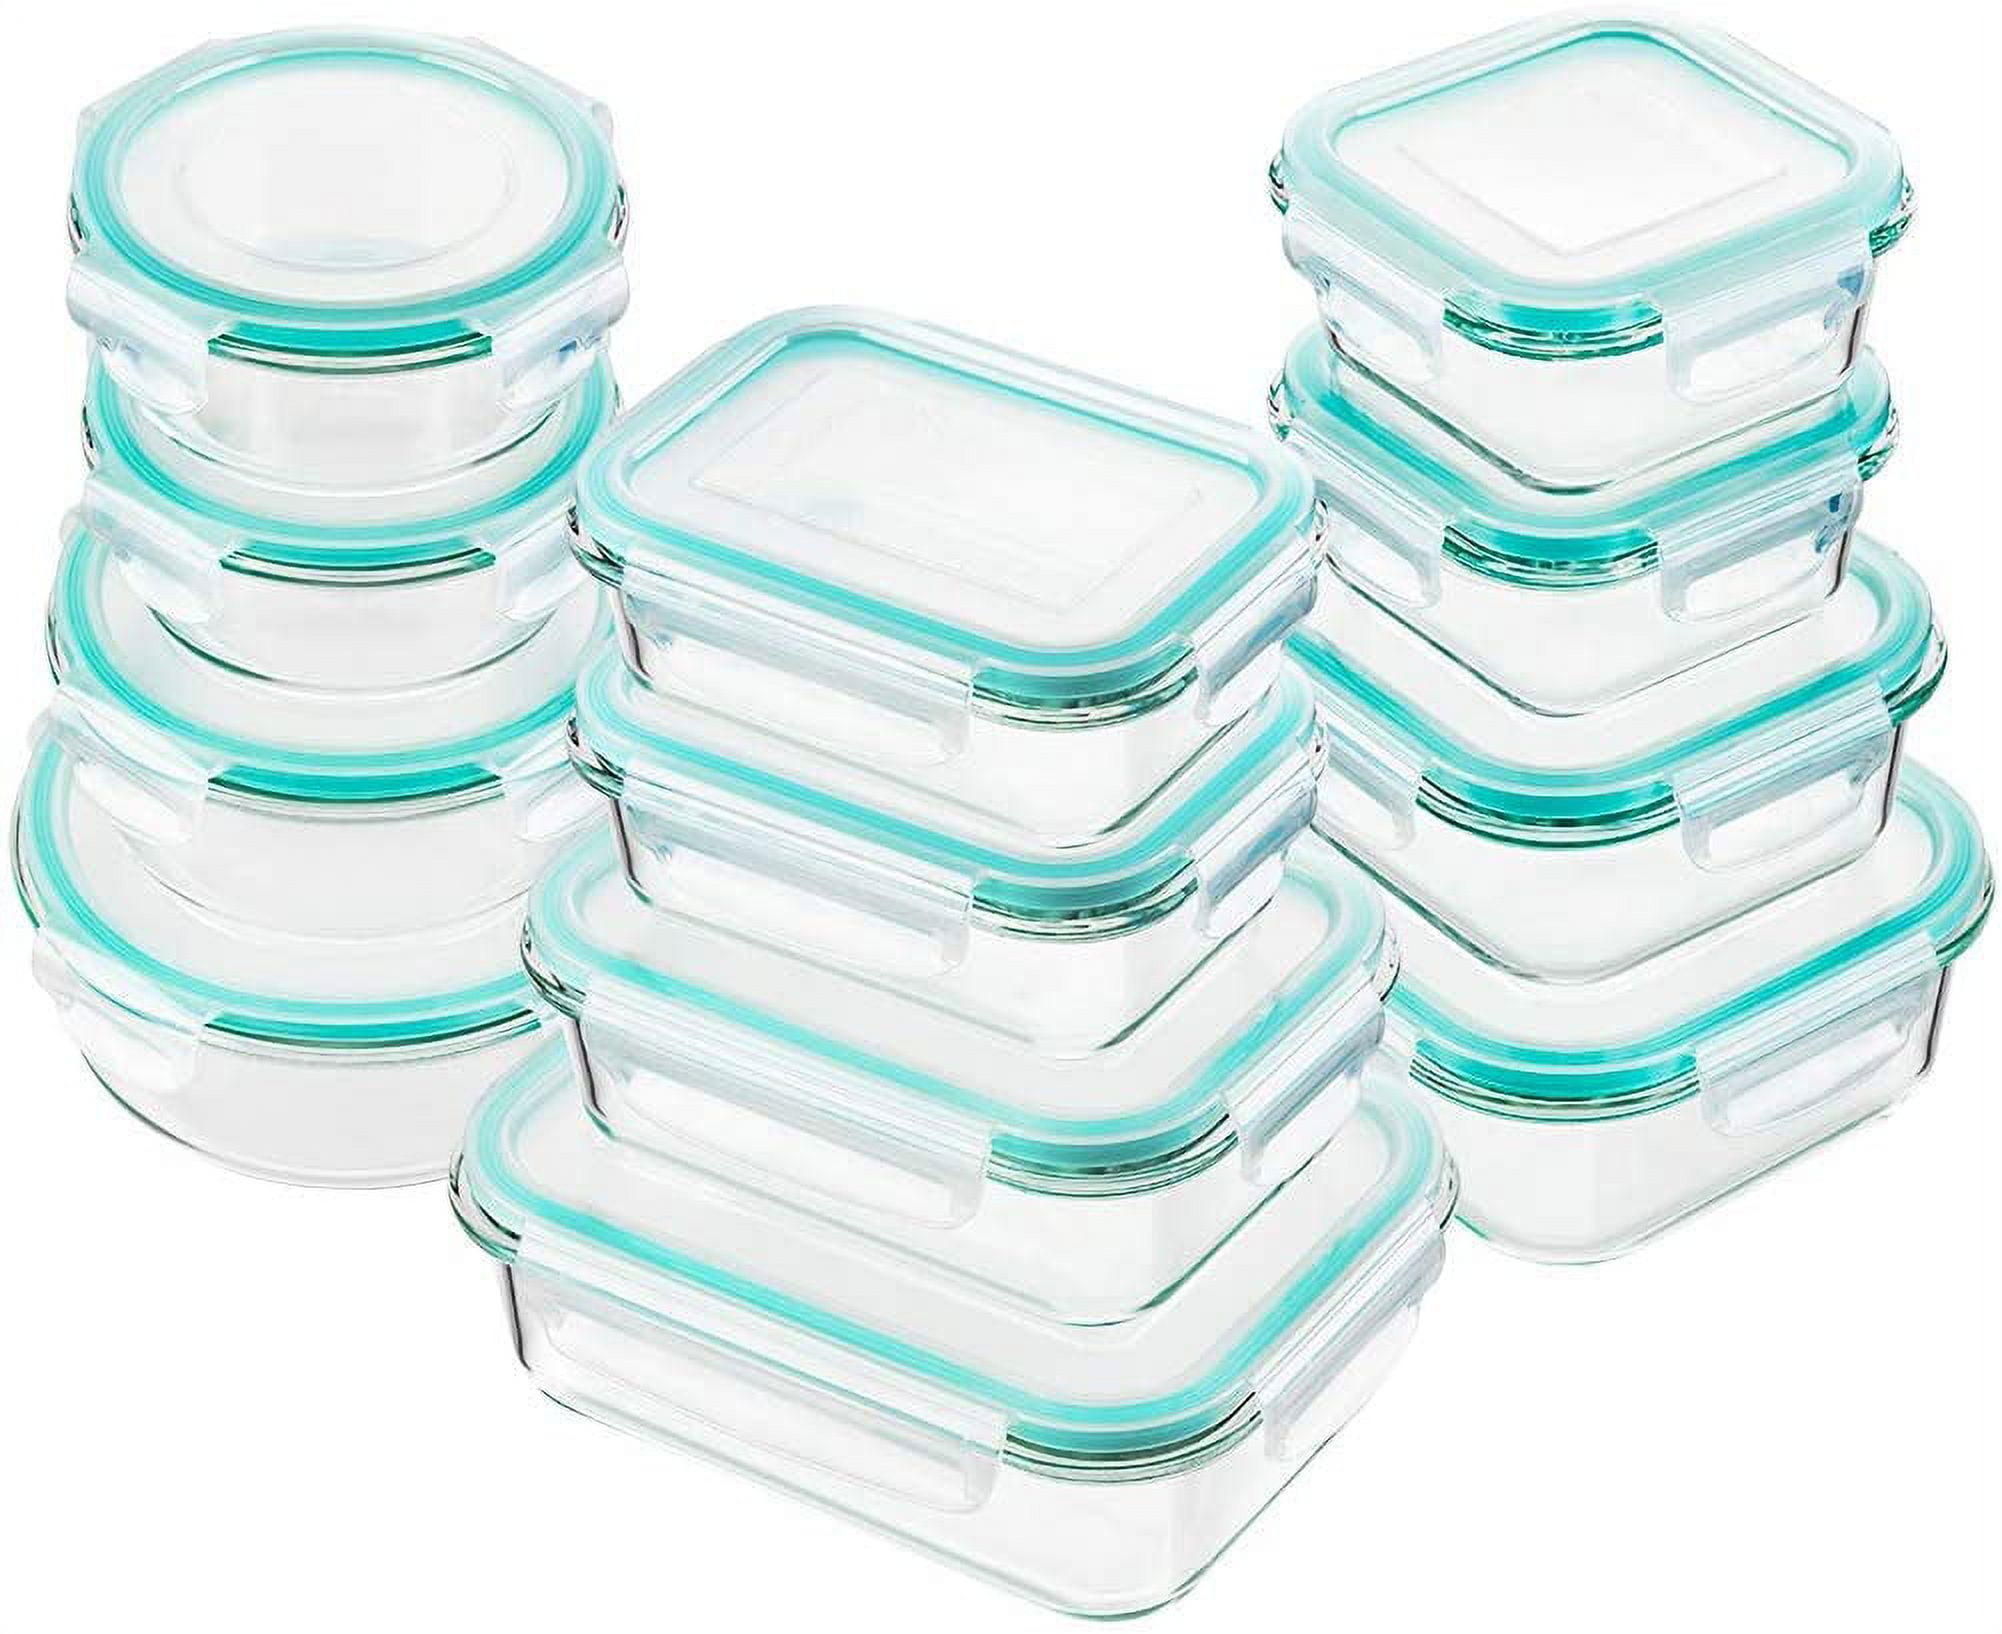 Bayco Glass Food Storage Containers with Lids, [24 Piece] Glass